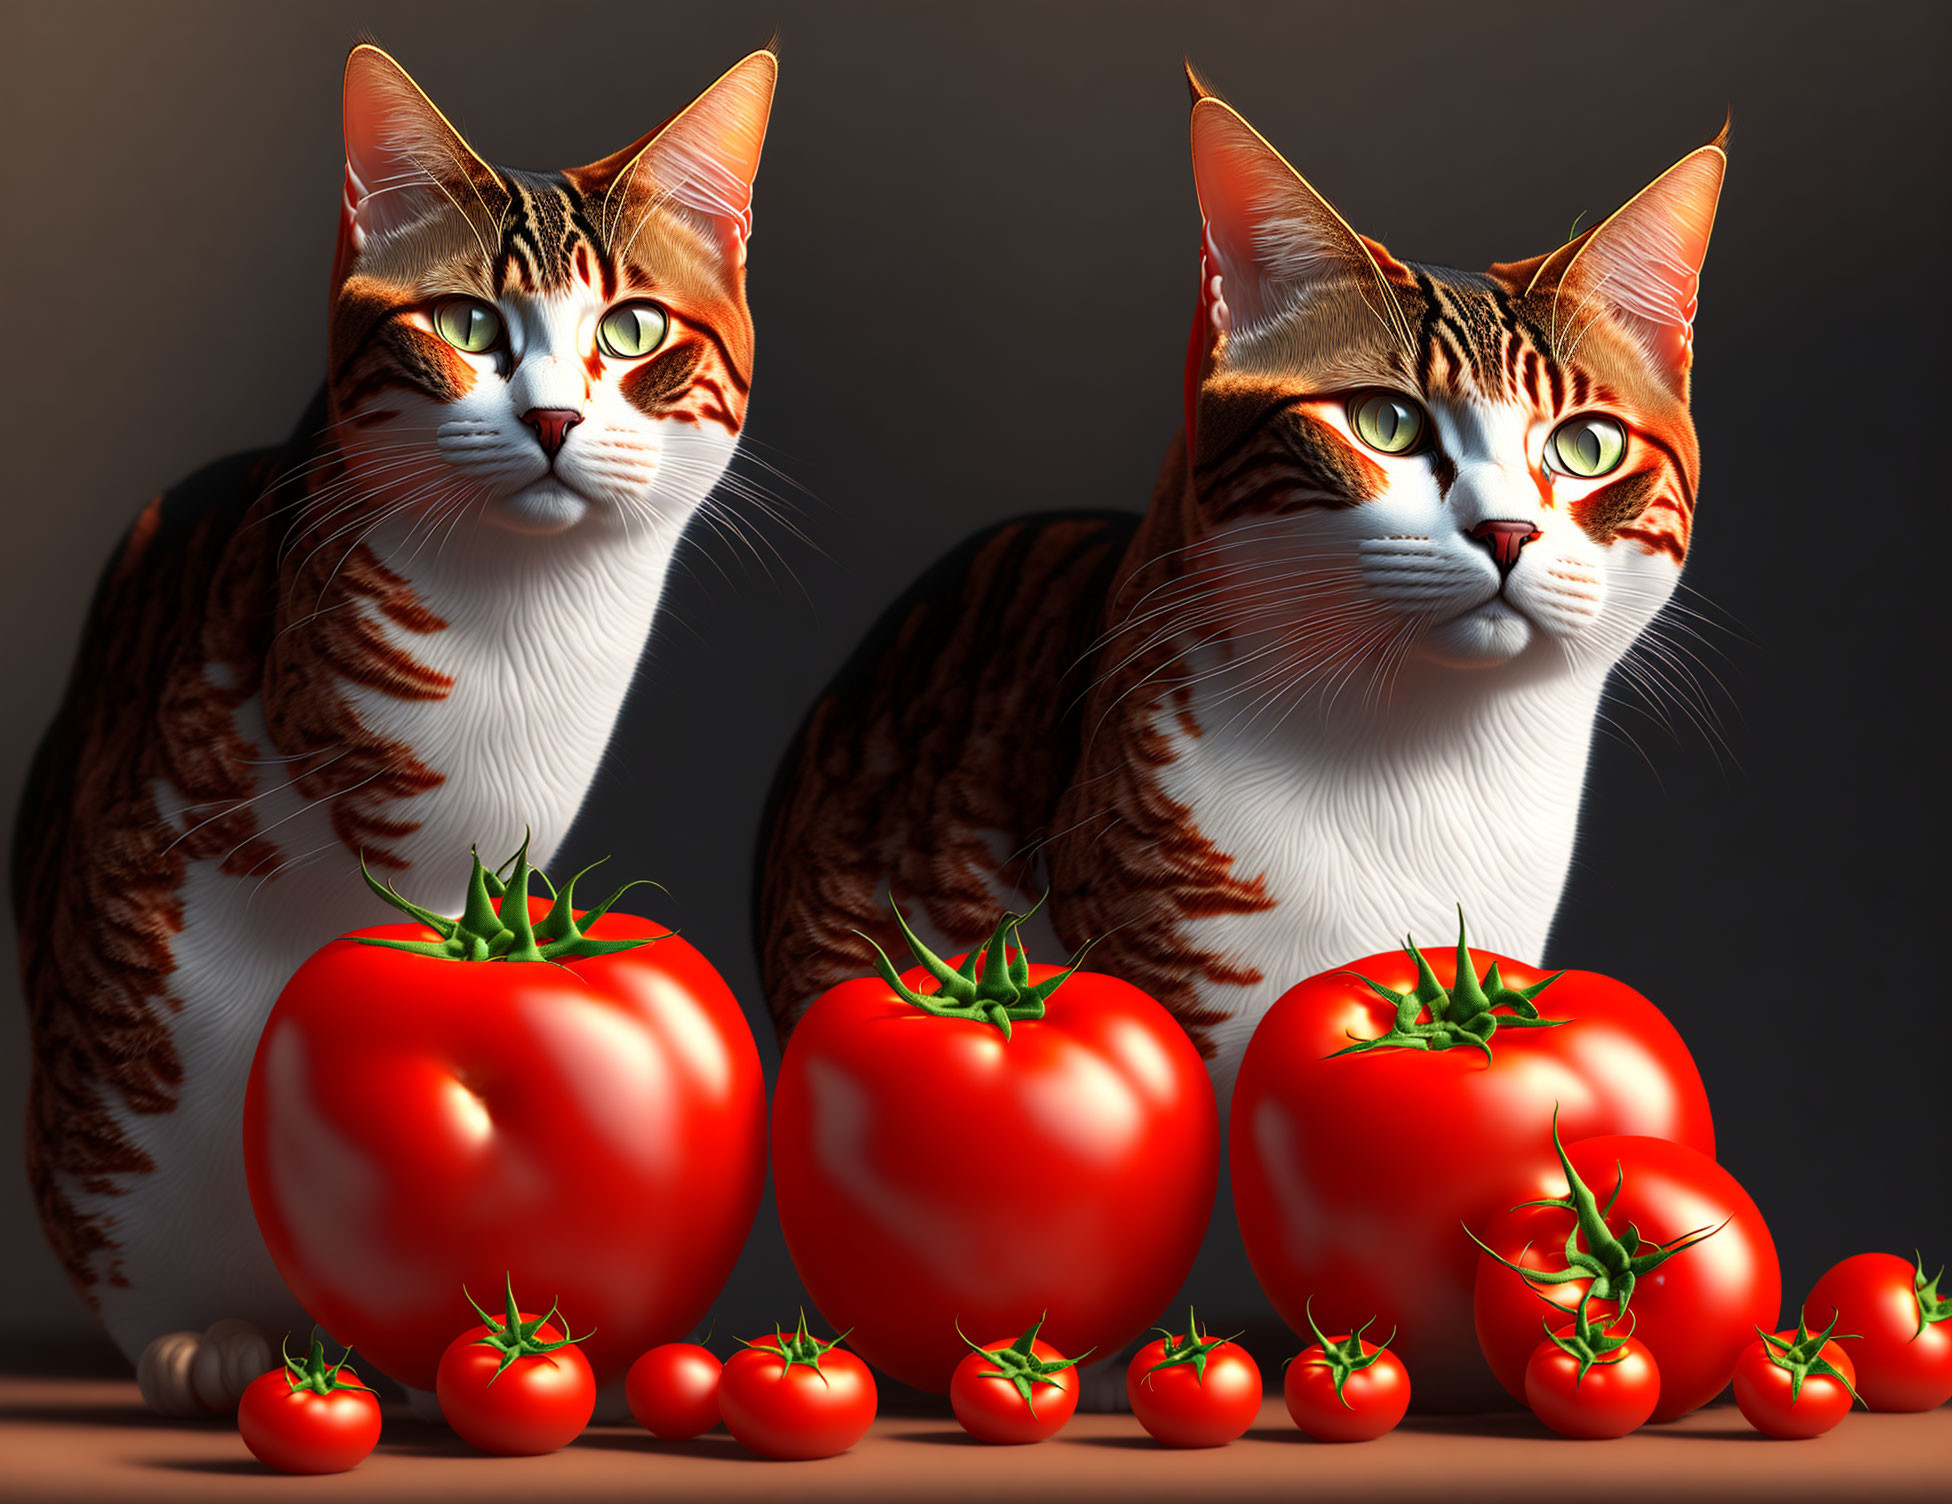 Cats and tomatoes